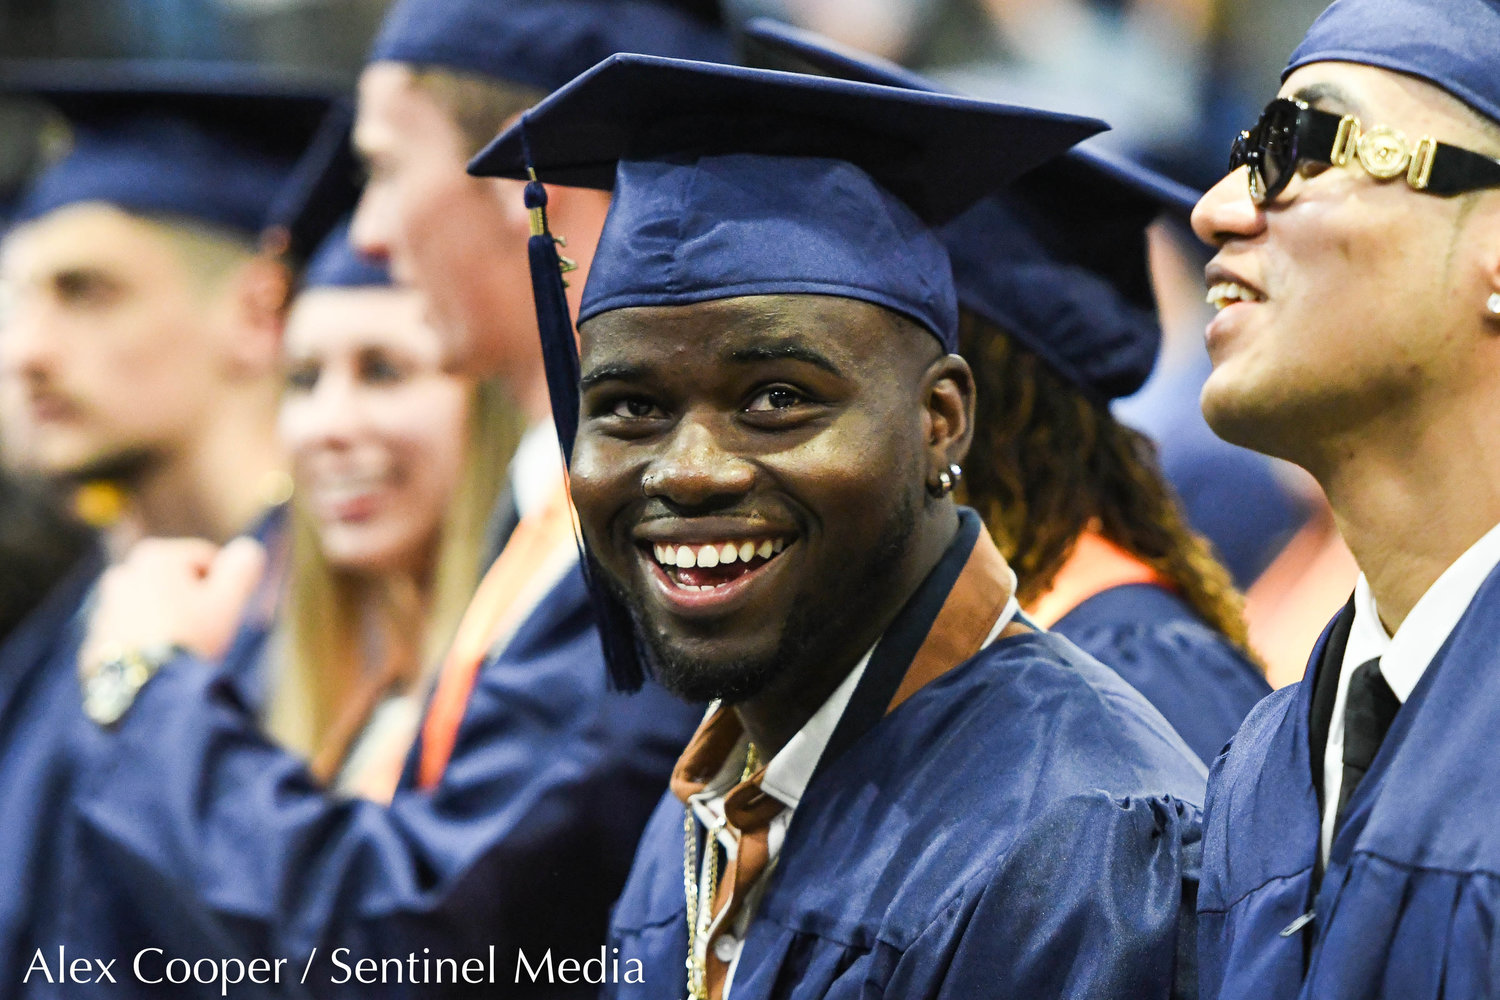 Jordan Marcel O'Brien smiles toward the crowd during Utica University's Commencement Ceremony on Thursday at the Adirondack Bank Center at the Utica Memorial Auditorium.